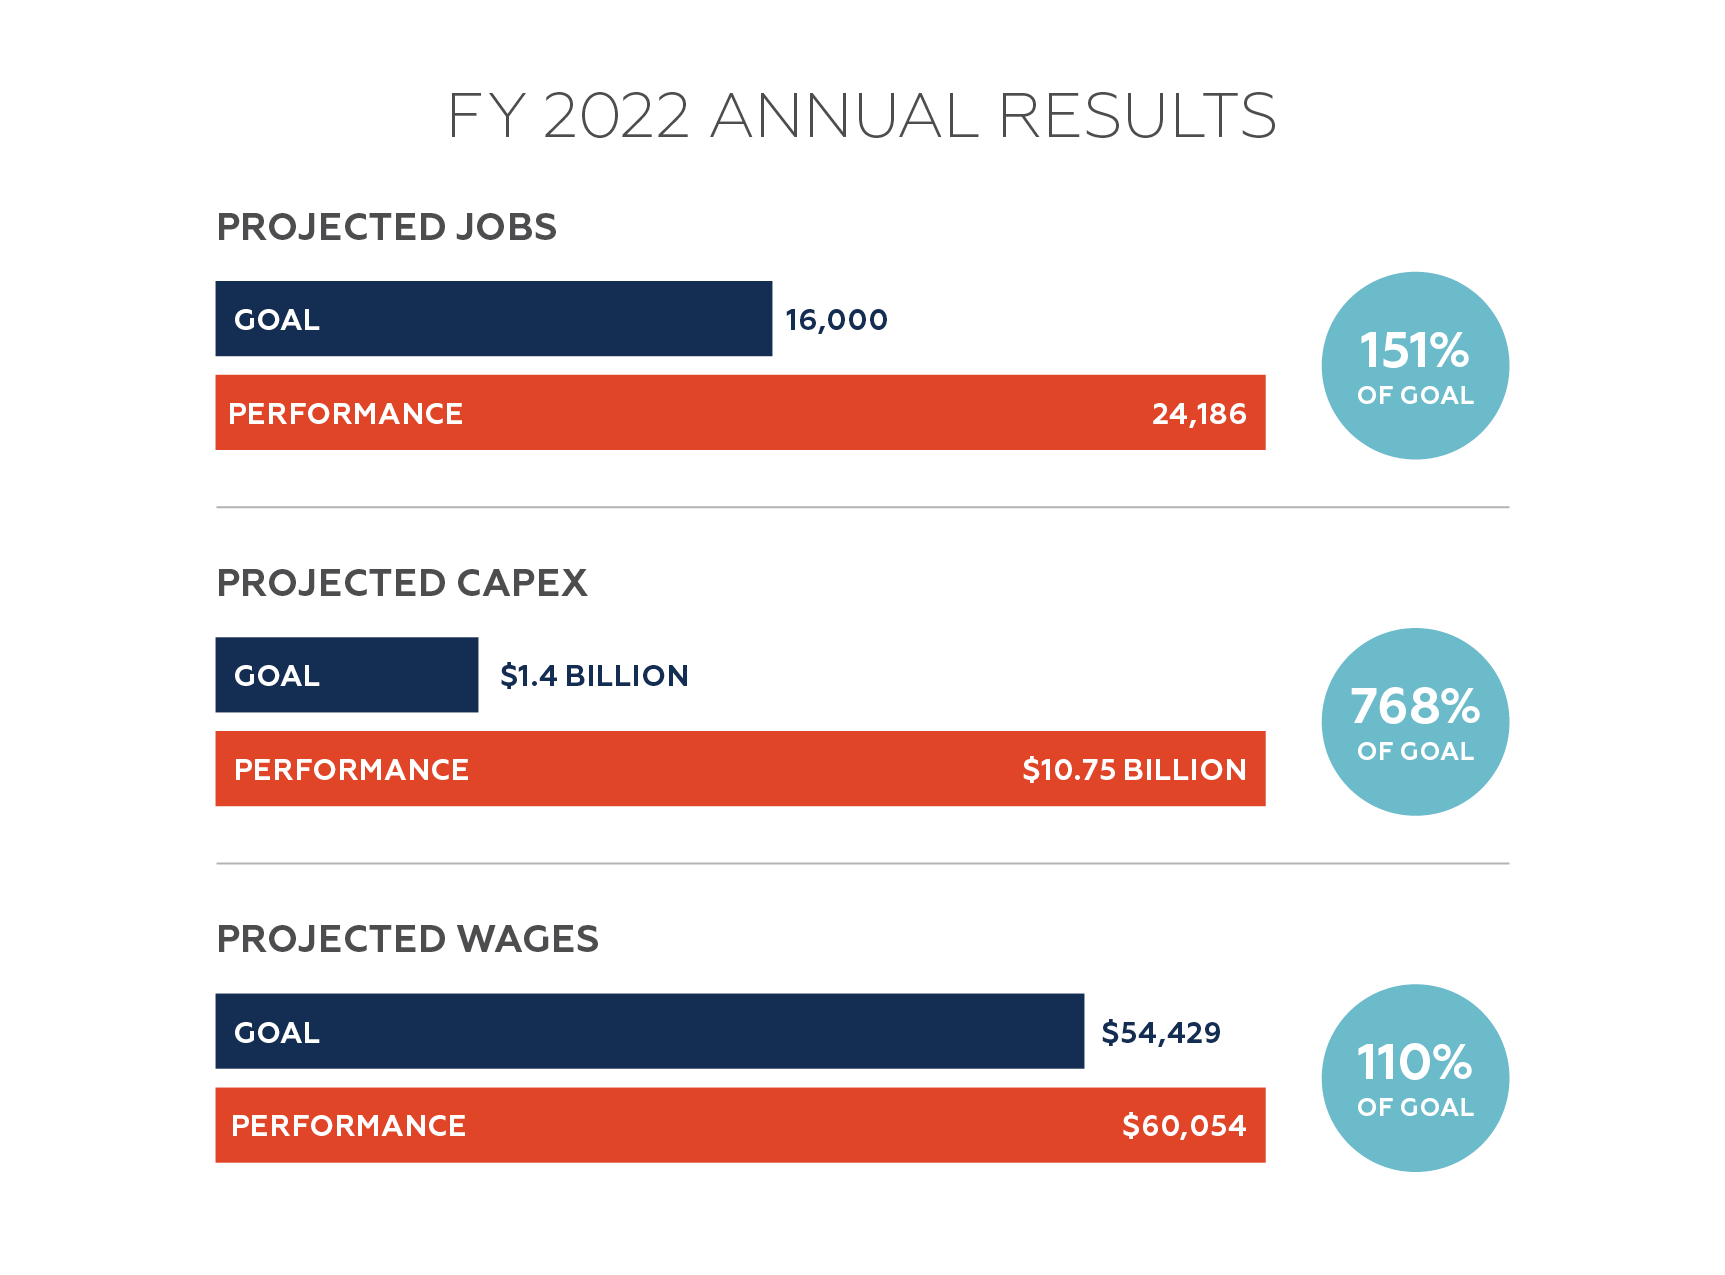 FY22 annual results